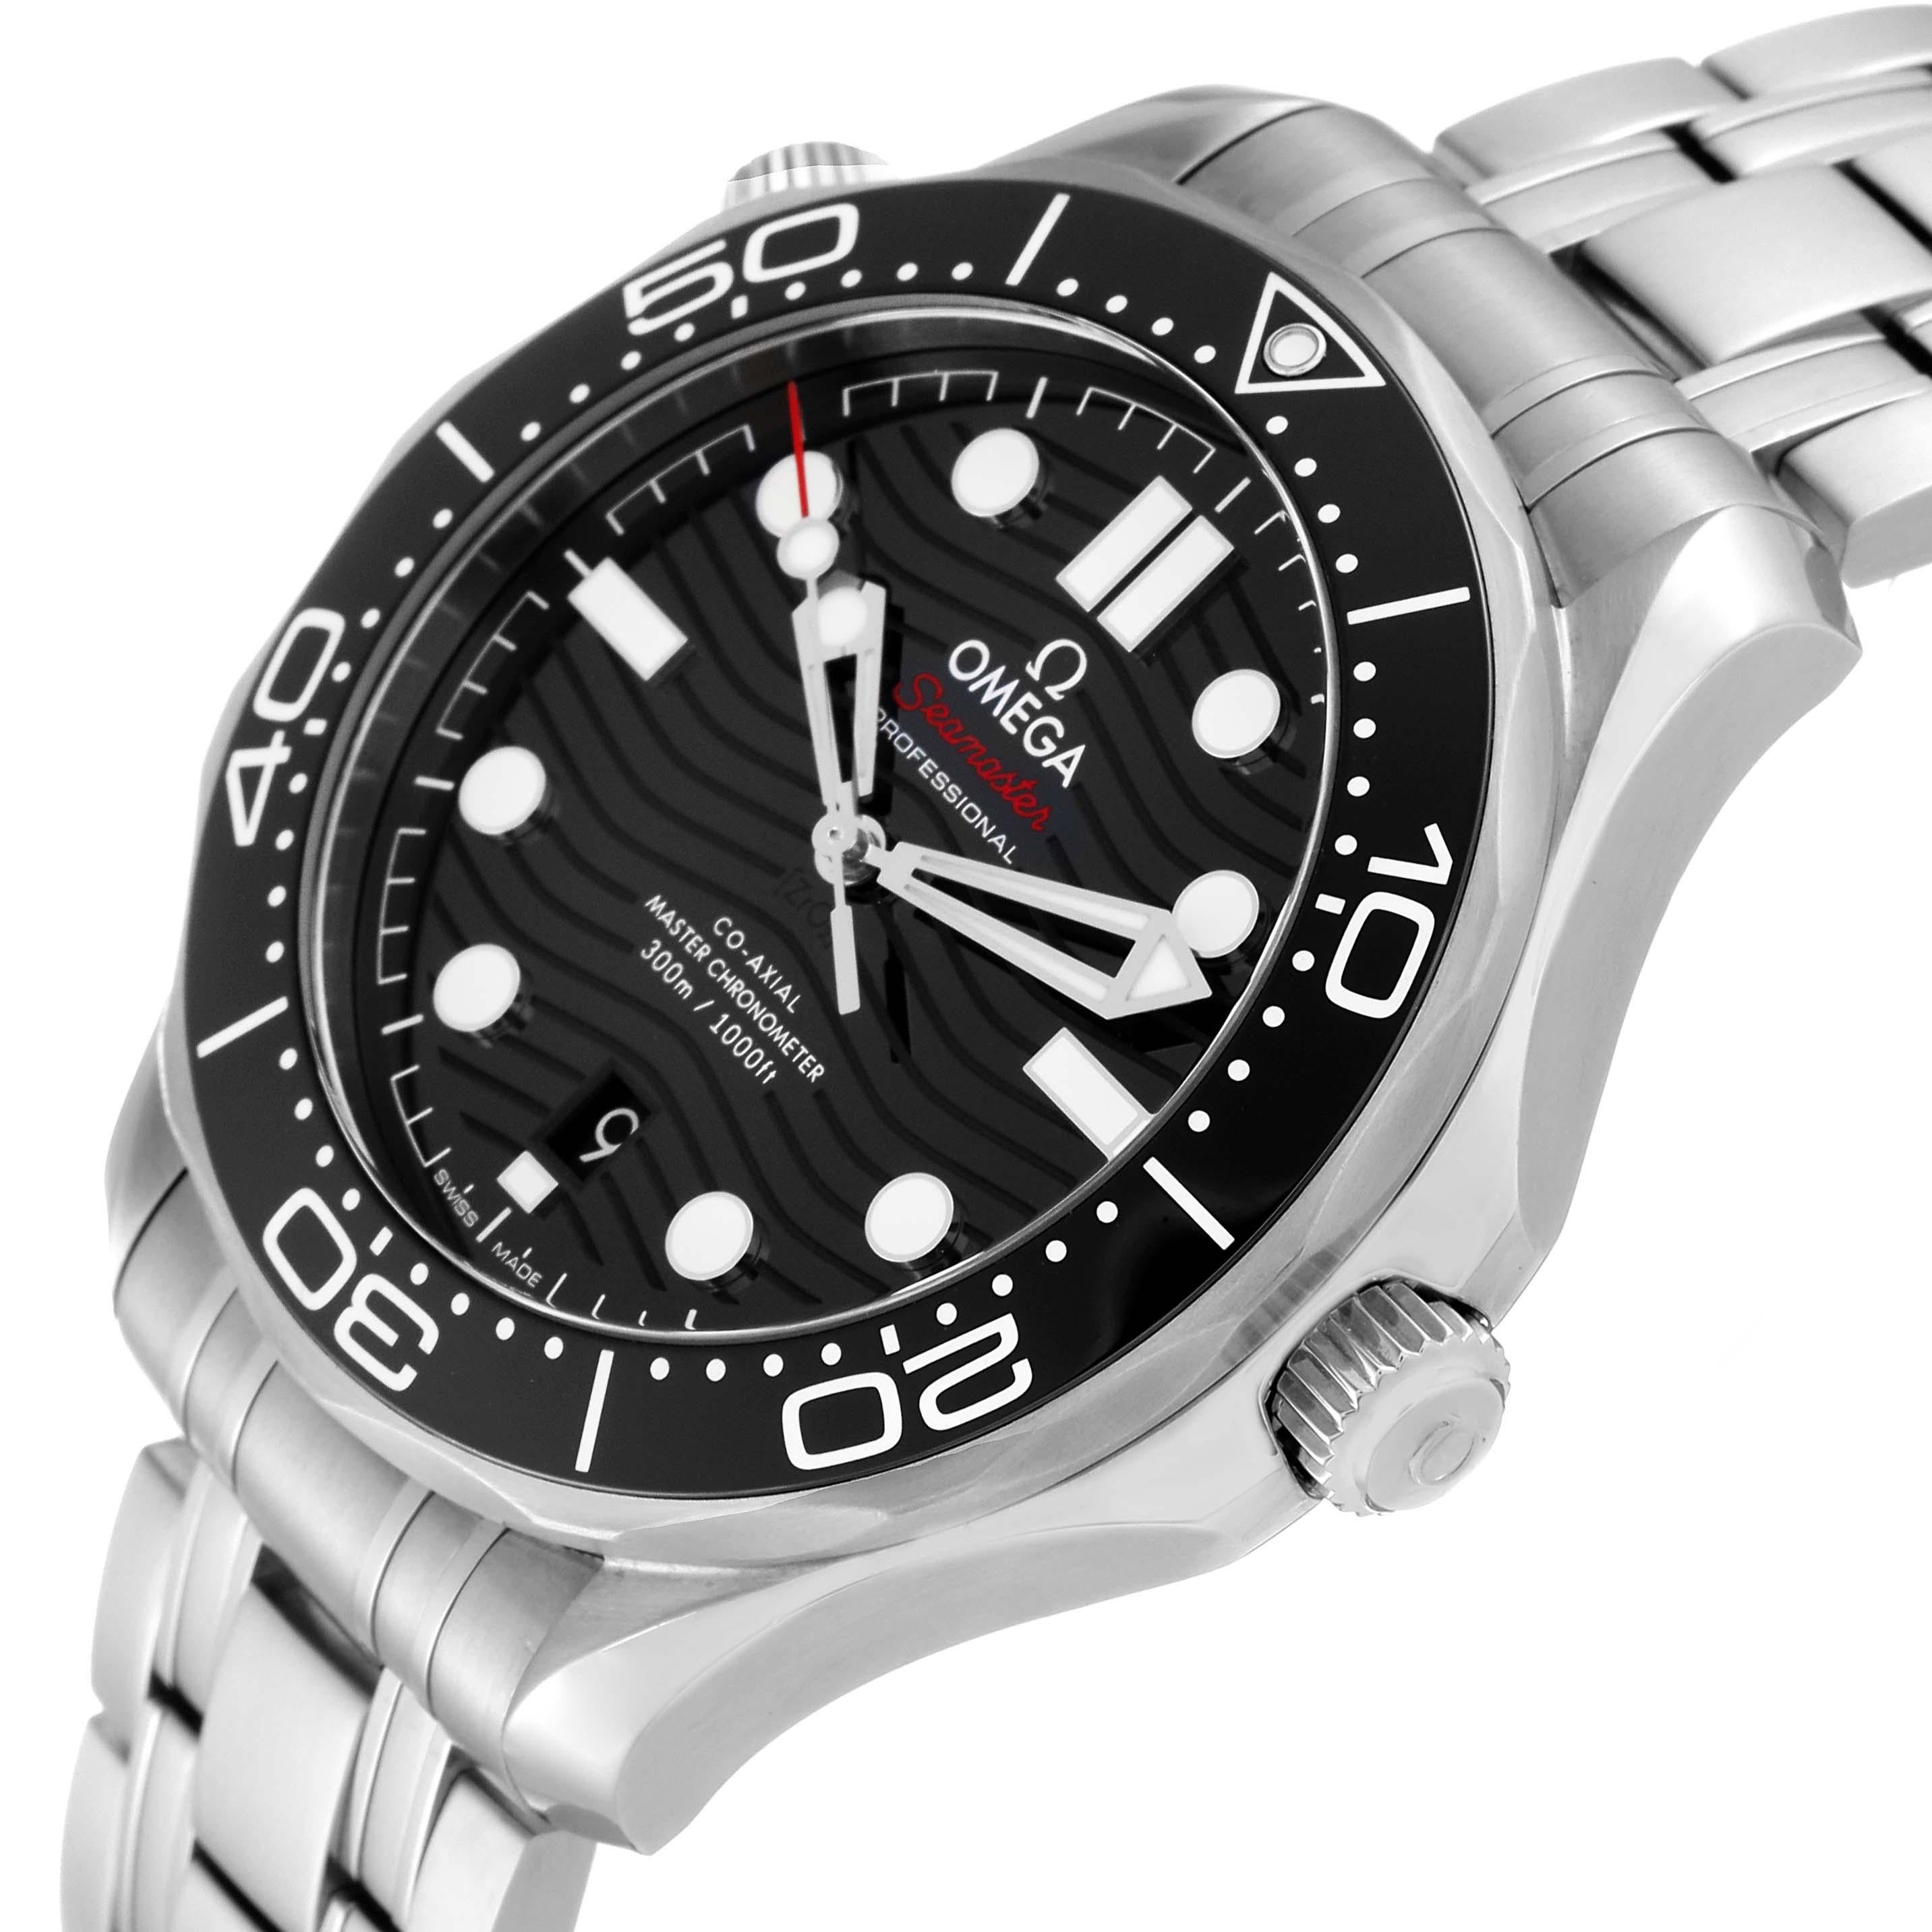 Omega Seamaster Diver 300M Steel Mens Watch 210.30.42.20.01.001 Box Card. Automatic self-winding movement with Co-Axial escapement. Certified Master Chronometer, approved by METAS, resistant to magnetic fields reaching 15,000 gauss. Free